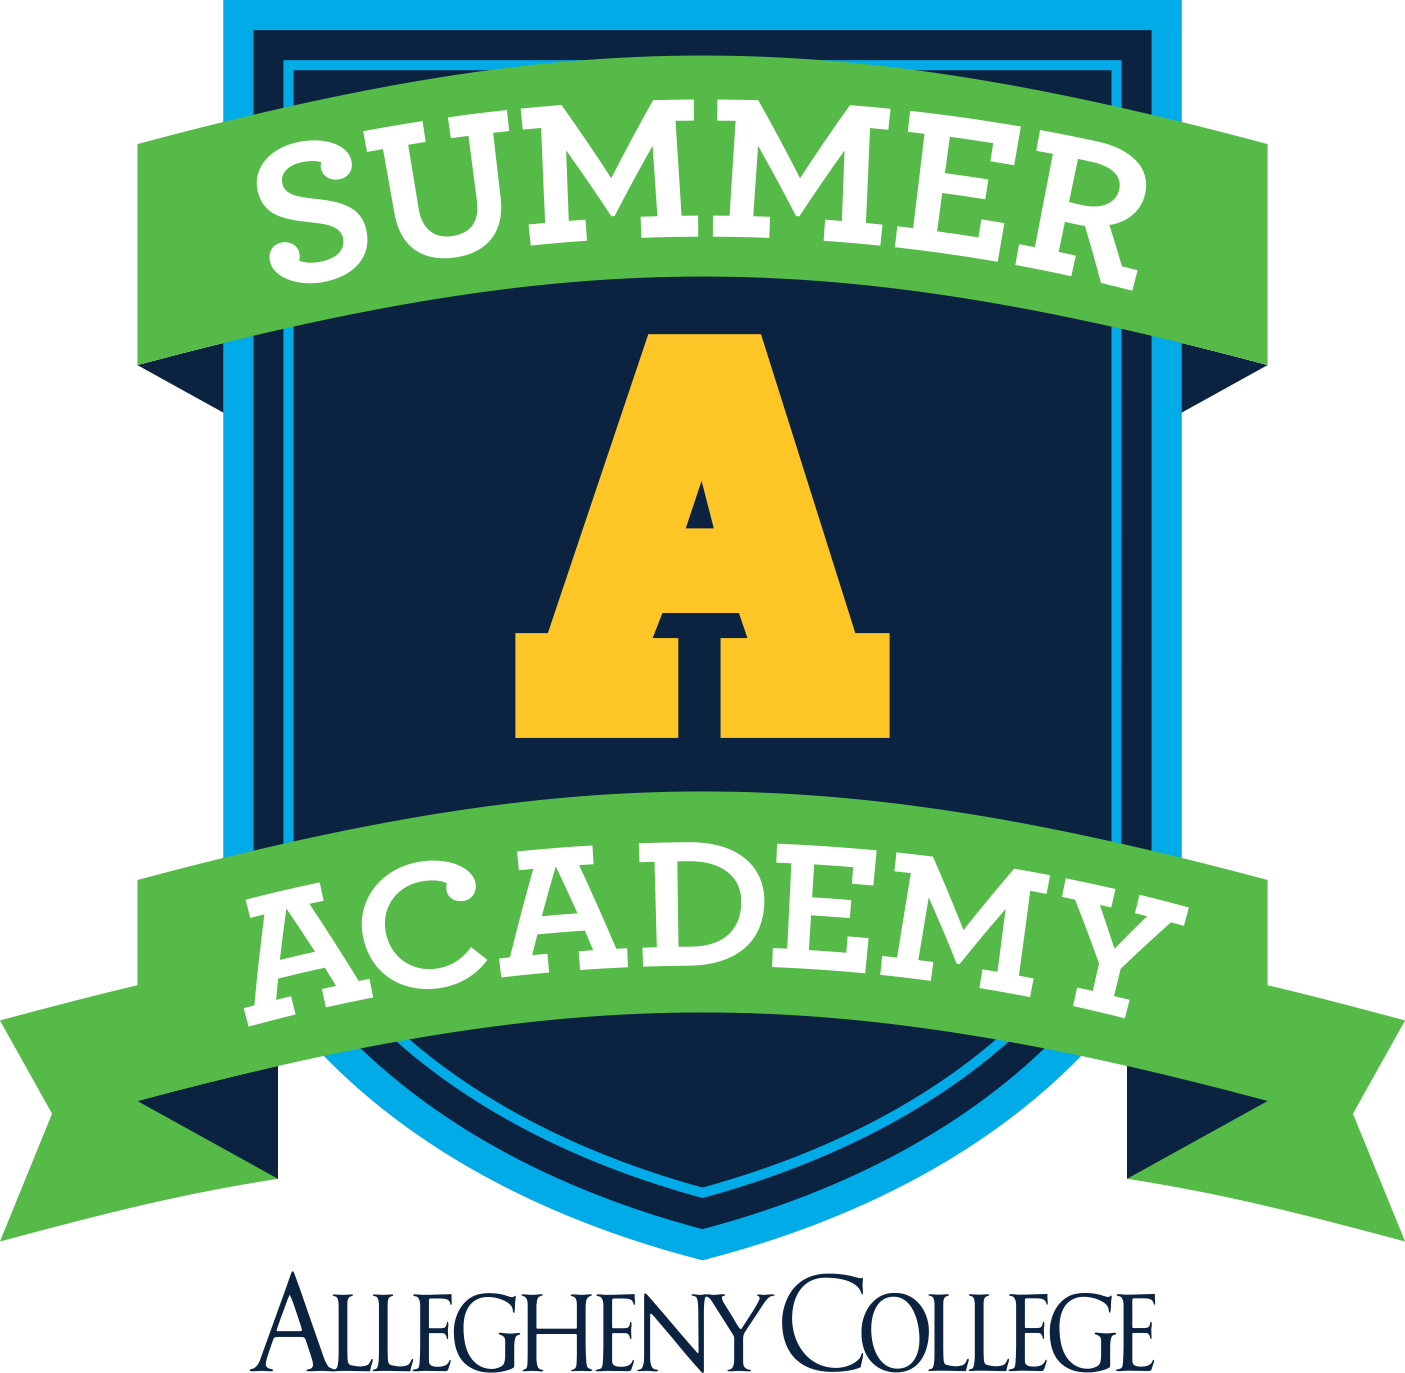 Allegheny College Summer Academy: for high school students